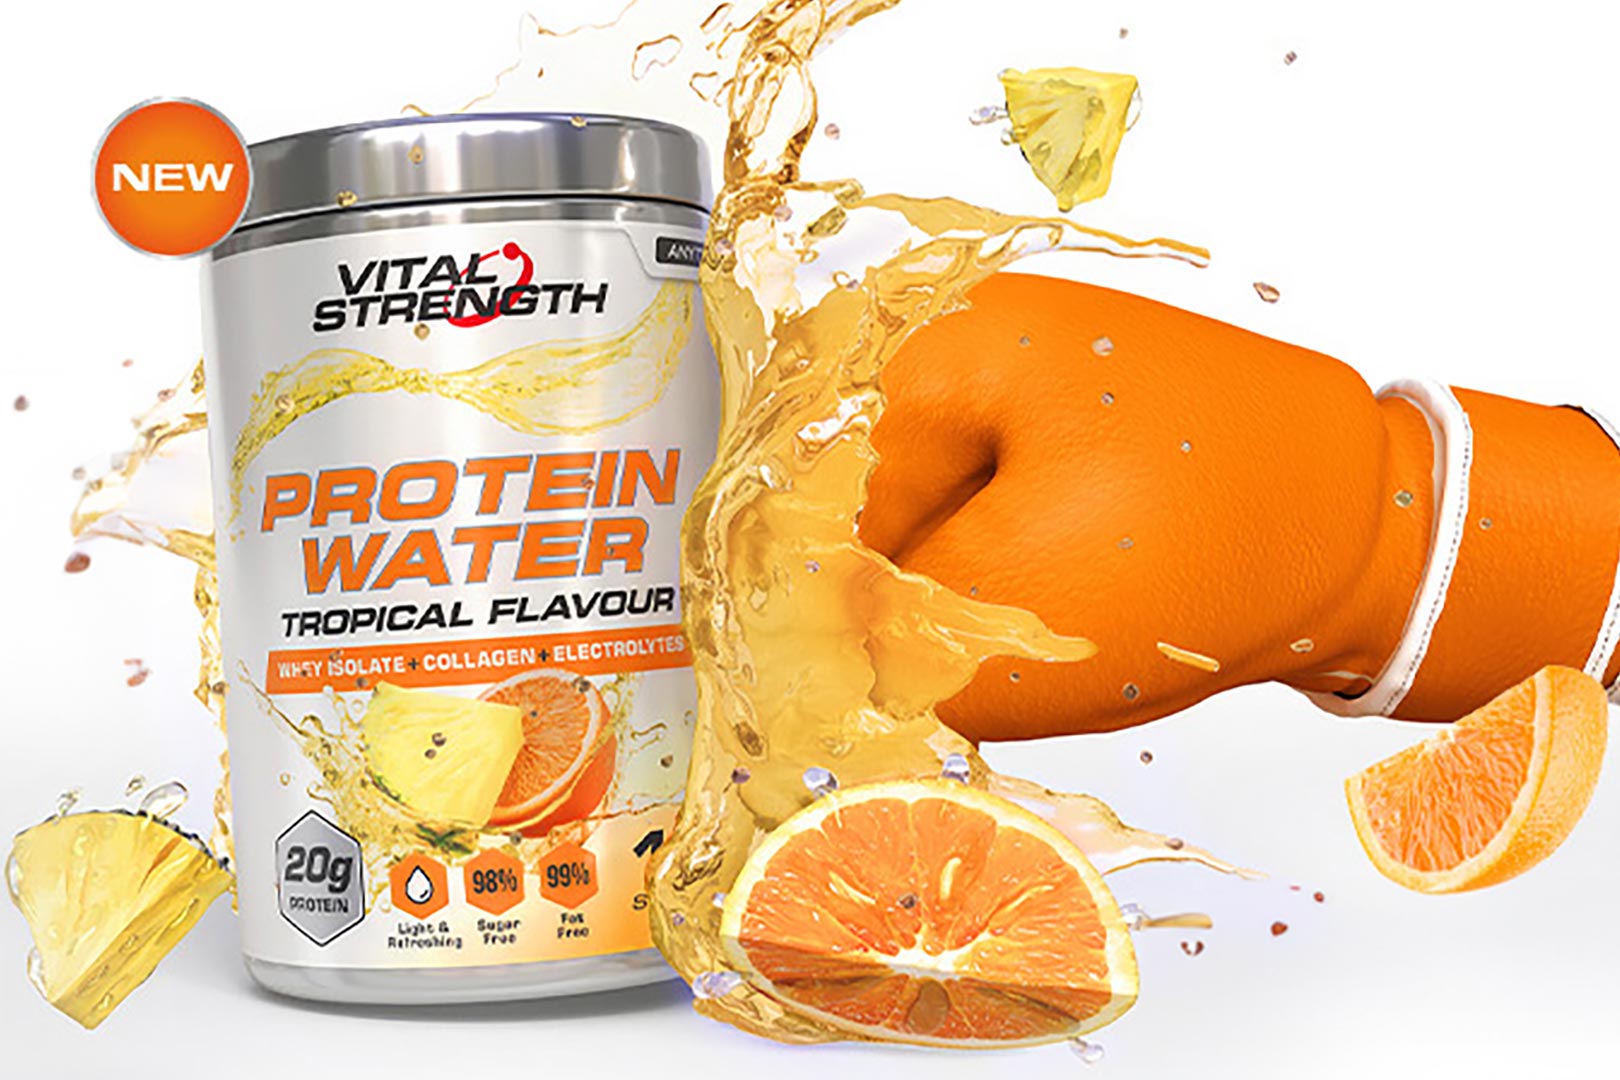 Vital Strength Protein Water